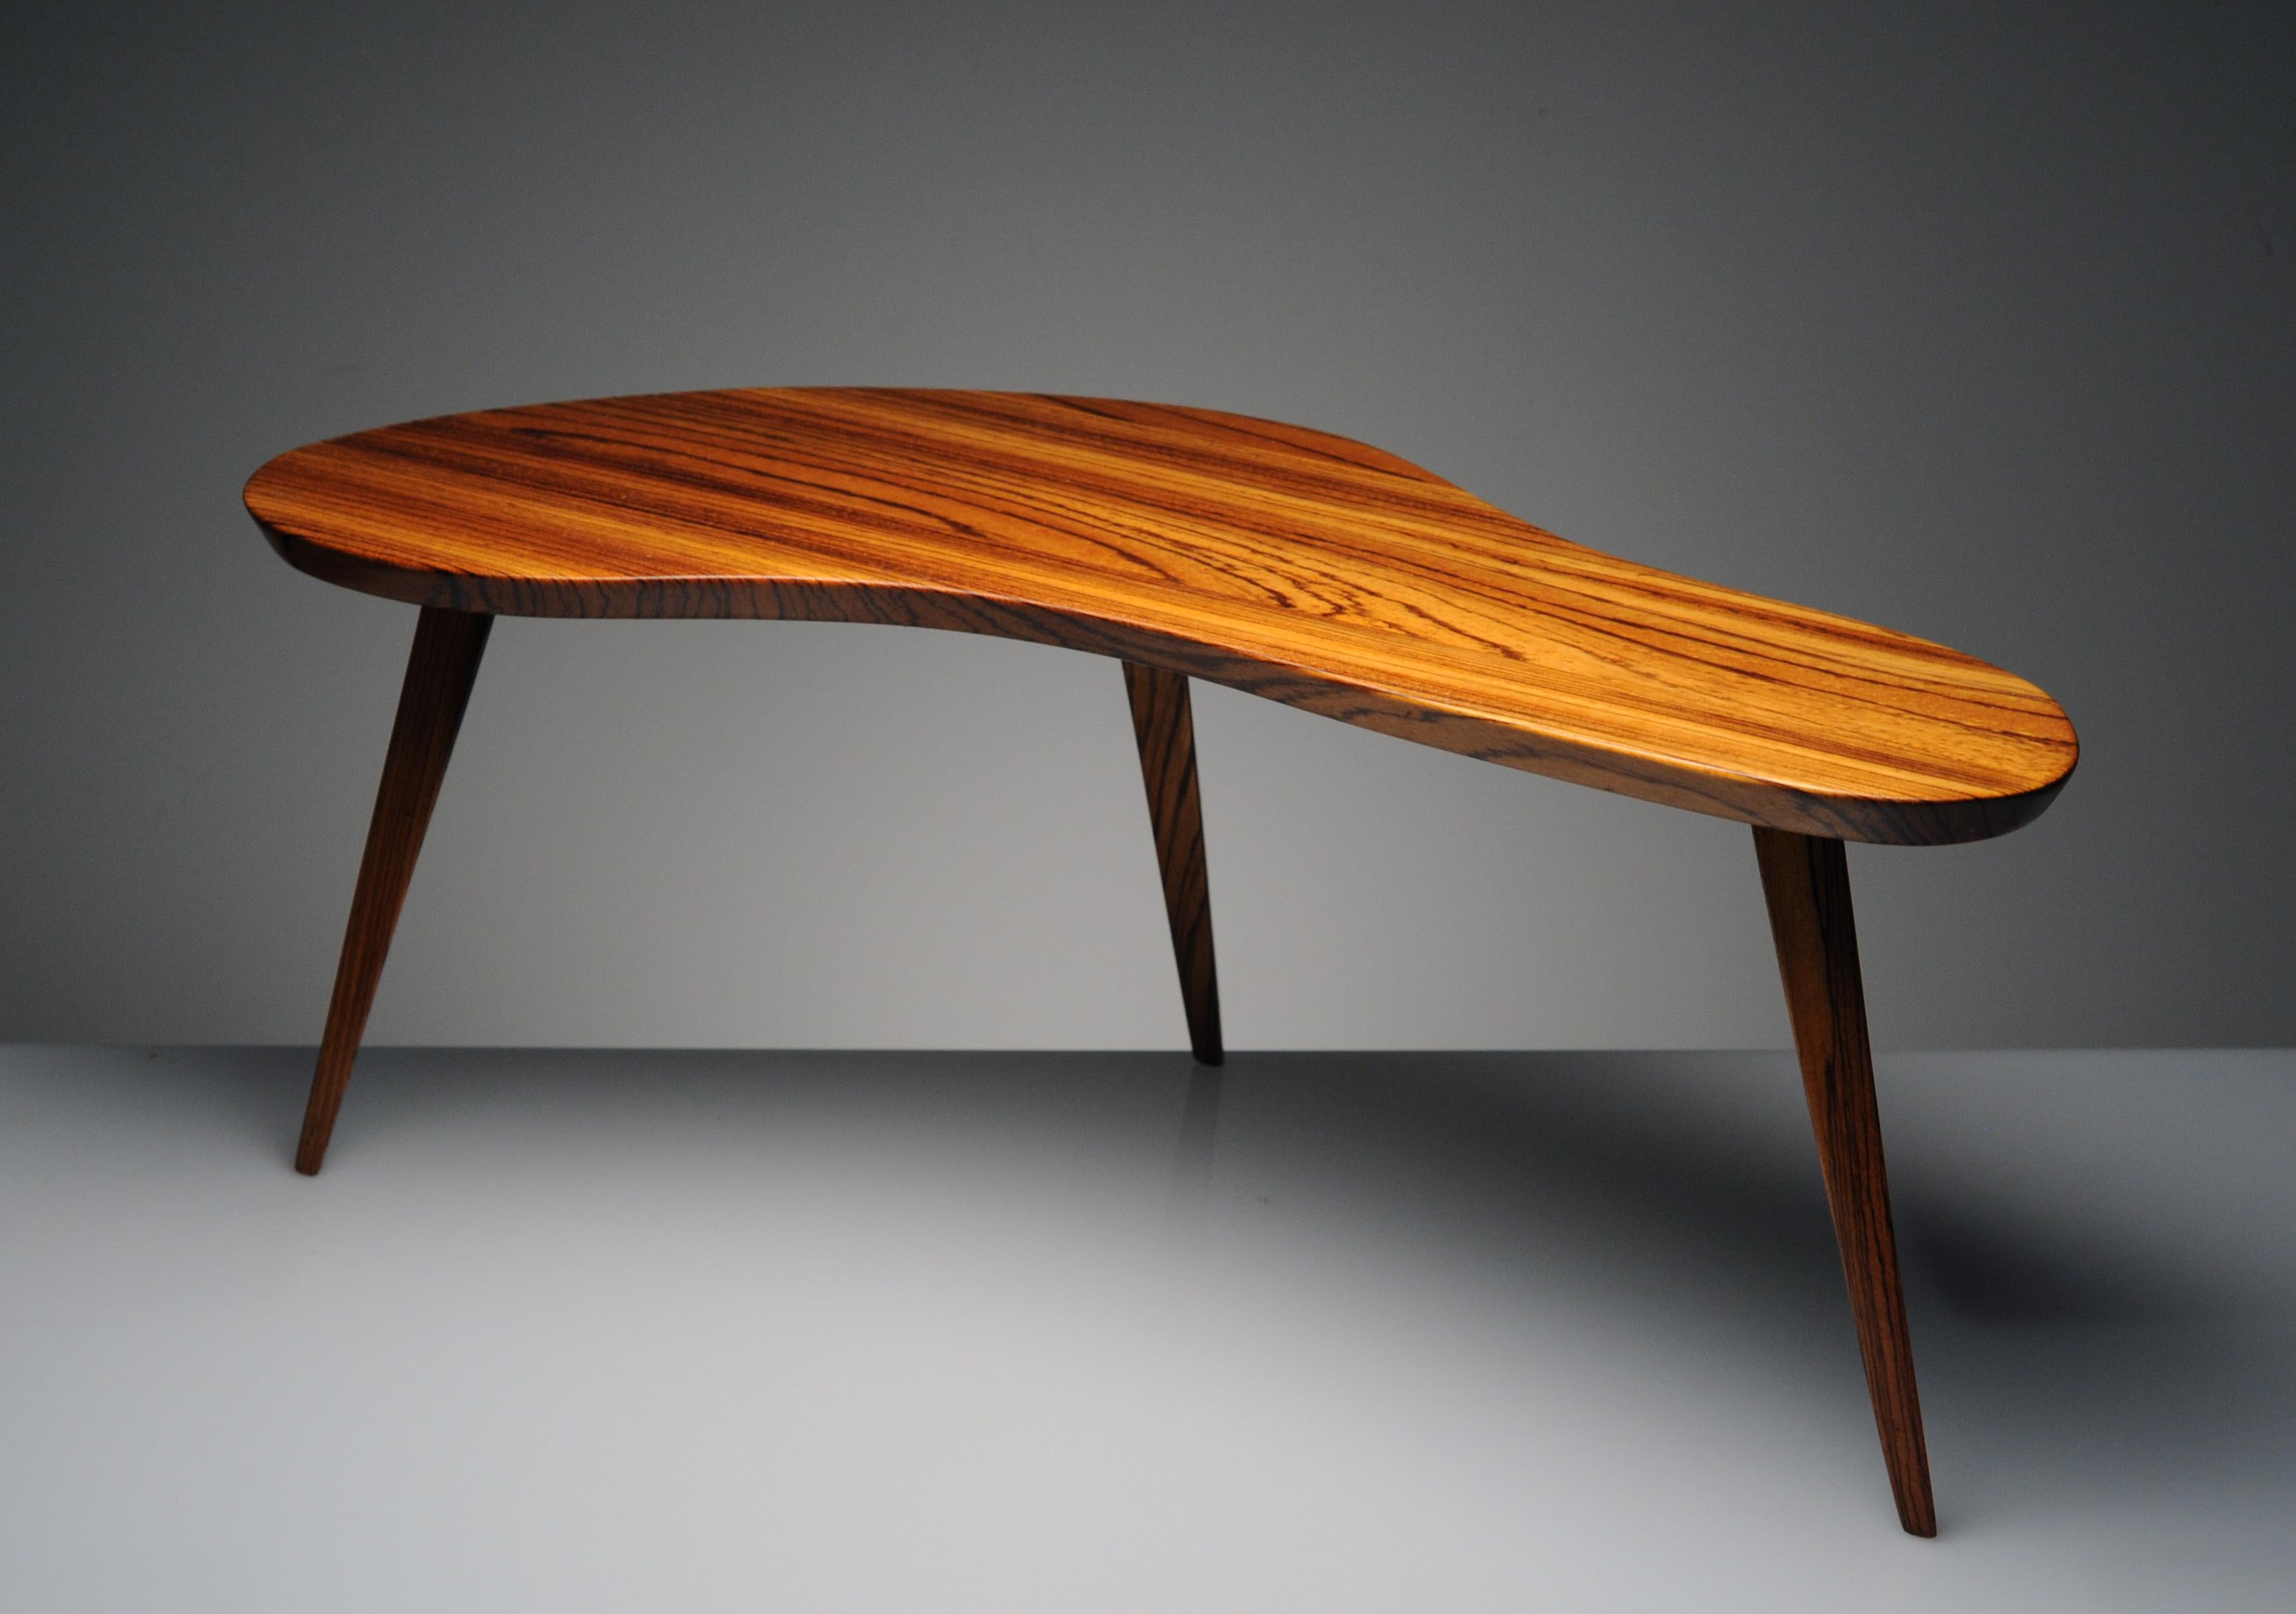 Beautiful handcrafted boomerang shaped coffee table made from solid Zebrawood. Striking grain throughout and beautifully shown with beveled edge and three solid triangular wood legs. Details of the table also reveal a beautiful bird's-eye pattern